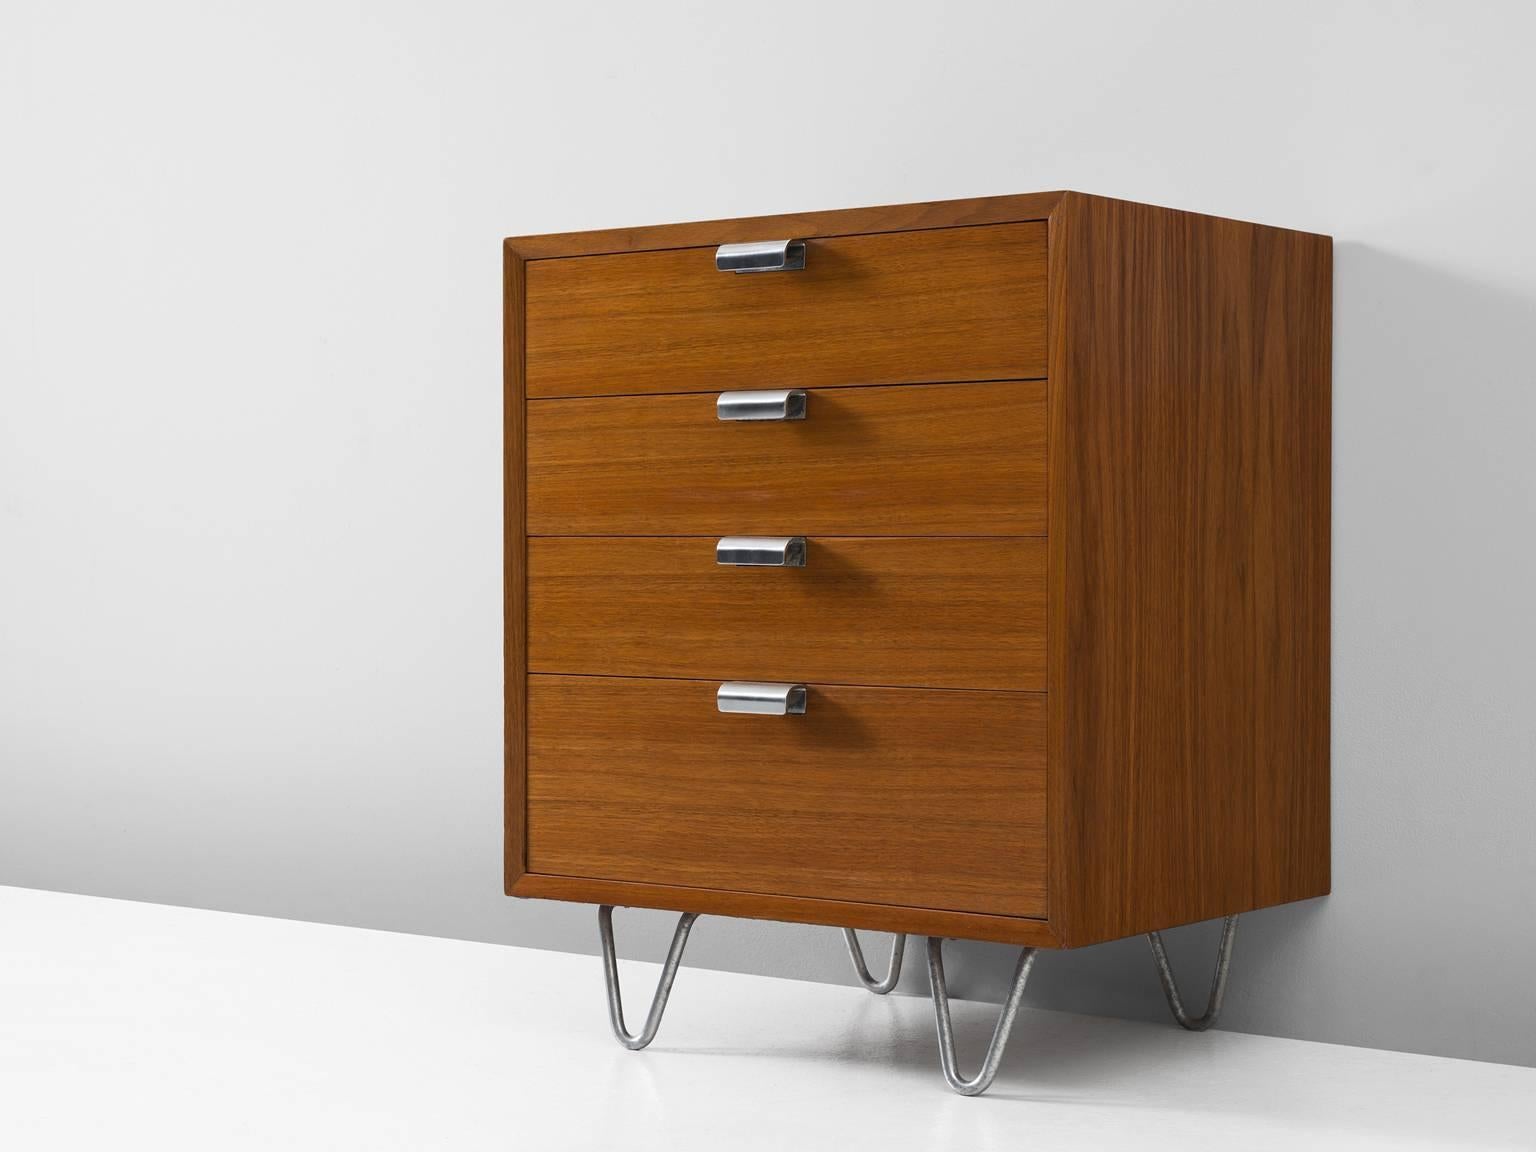 Dresser, in teak and metal, by George Nelson for Herman Miller, United States, 1950s.

Small four-drawer cabinet by designer George Nelson. The design of this dresser is simplistic, yet highly effective. With just the right details, this small